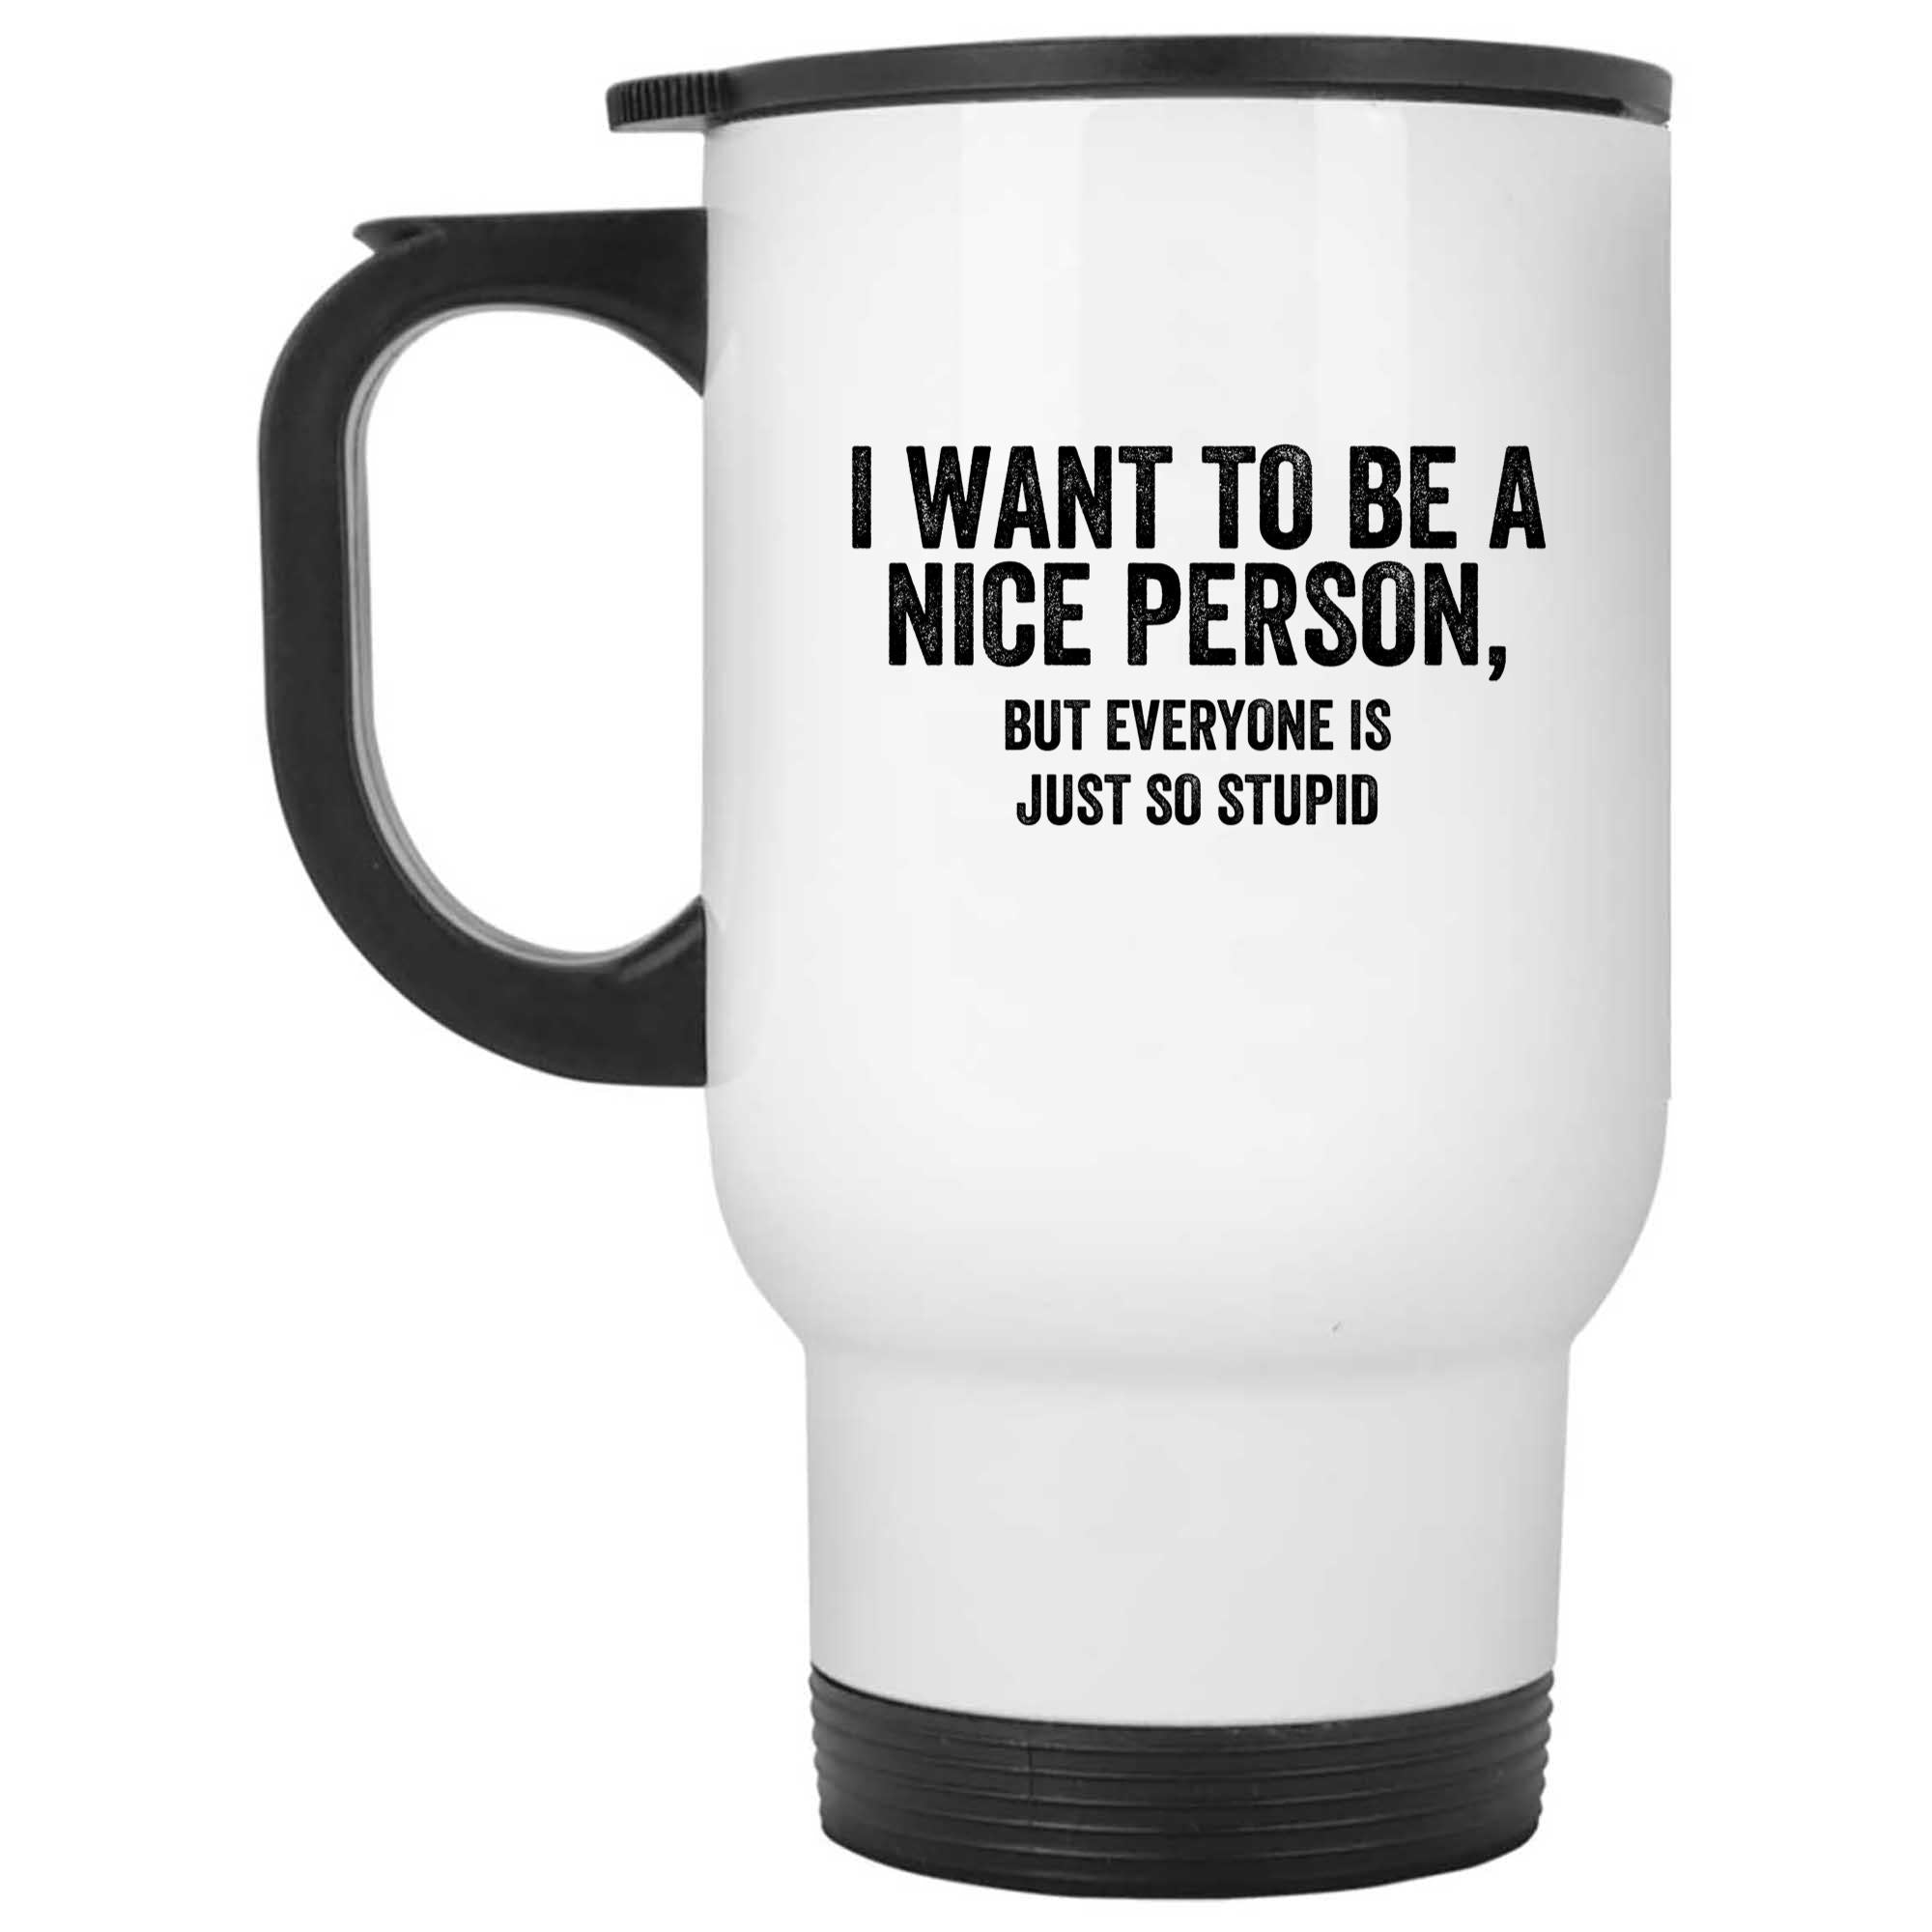 Skitongifts Funny Ceramic Novelty Coffee Mug I Want To Be A Nice Person, But Everyone Is So Stupid(1) l5WcRjF